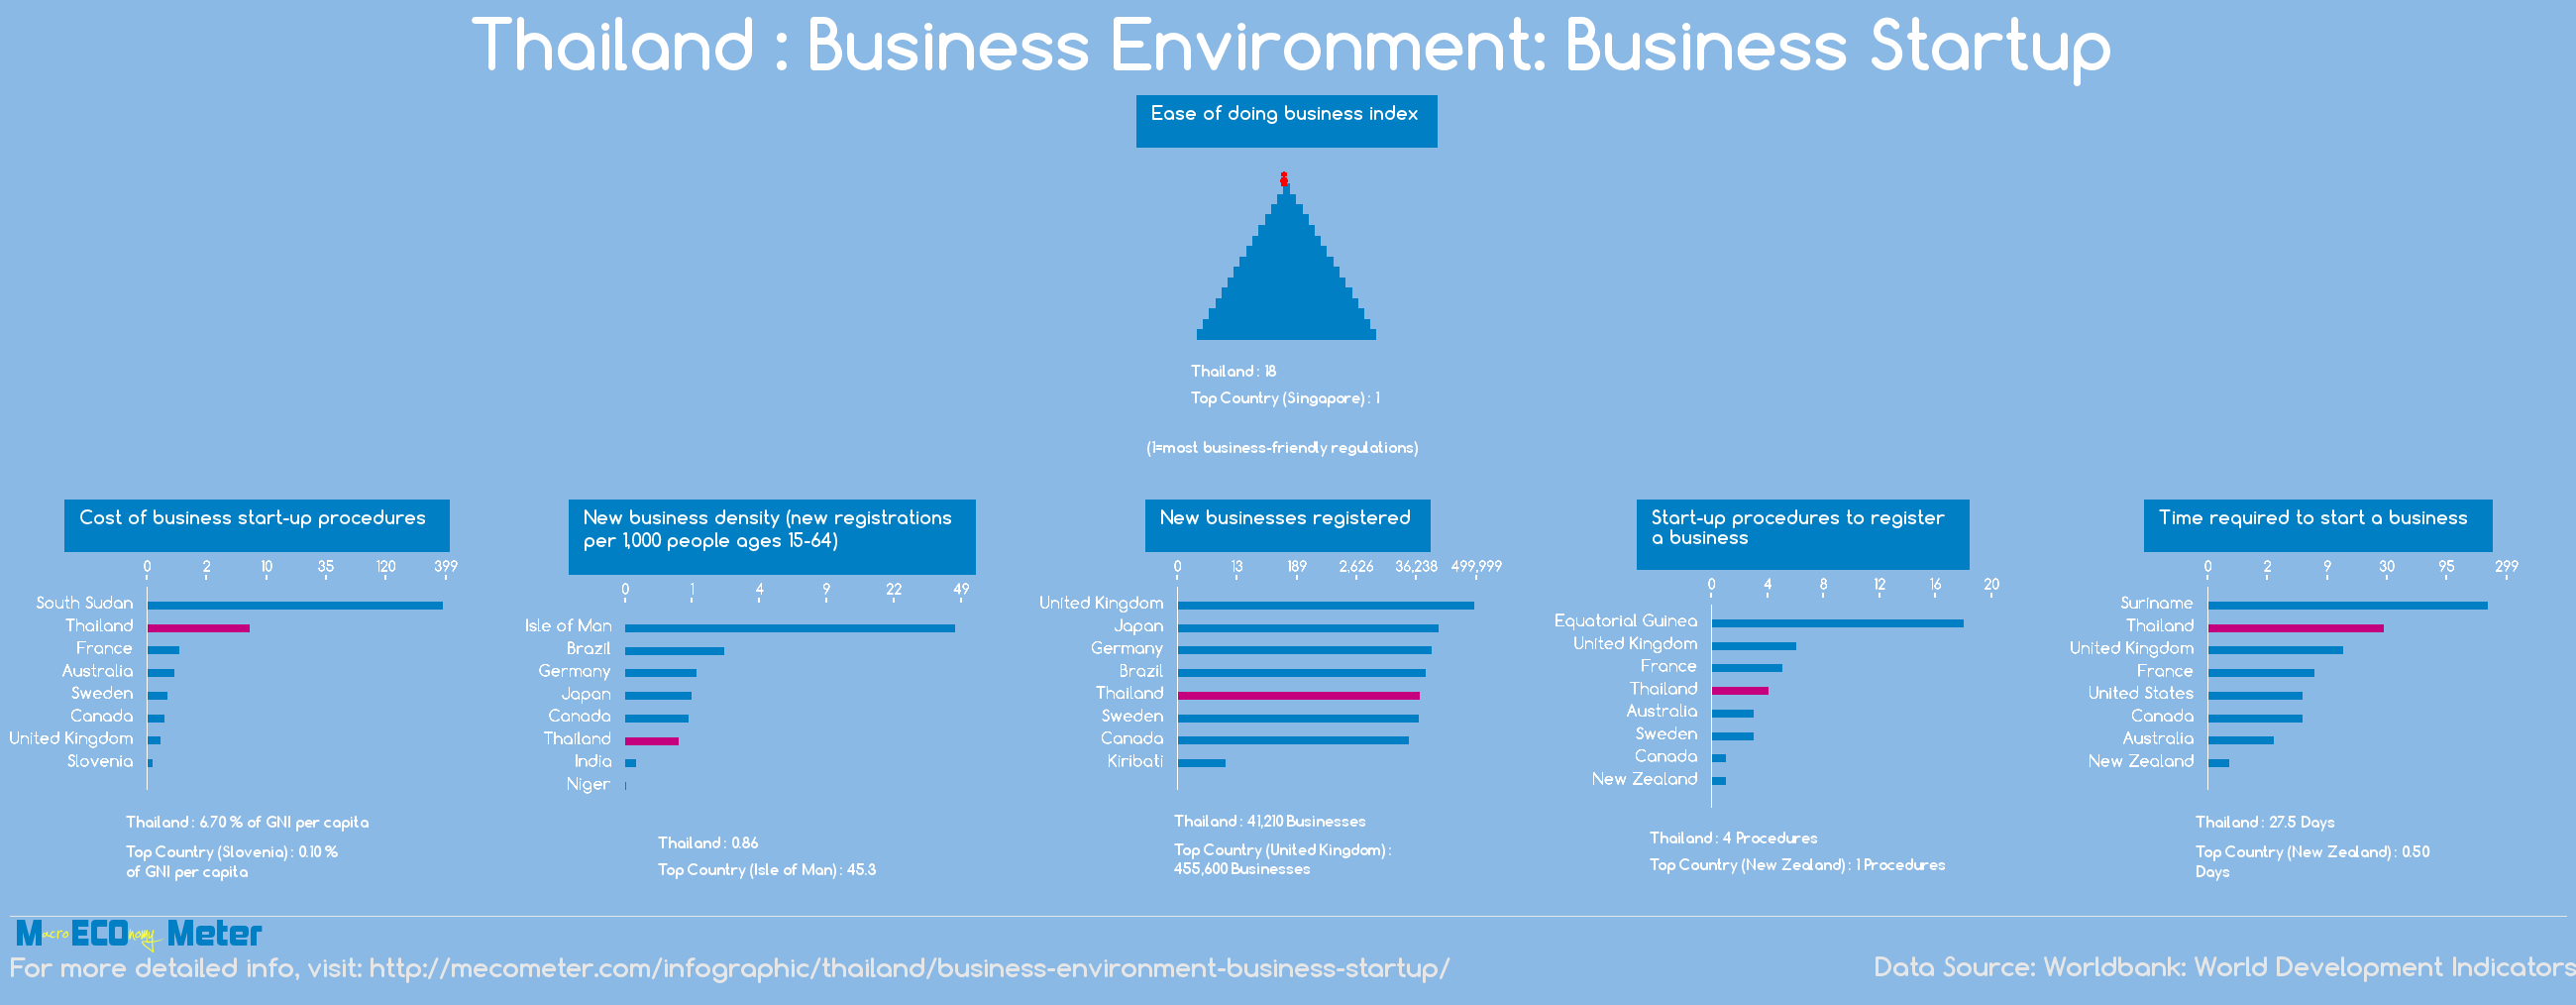 Thailand : Business Environment: Business Startup